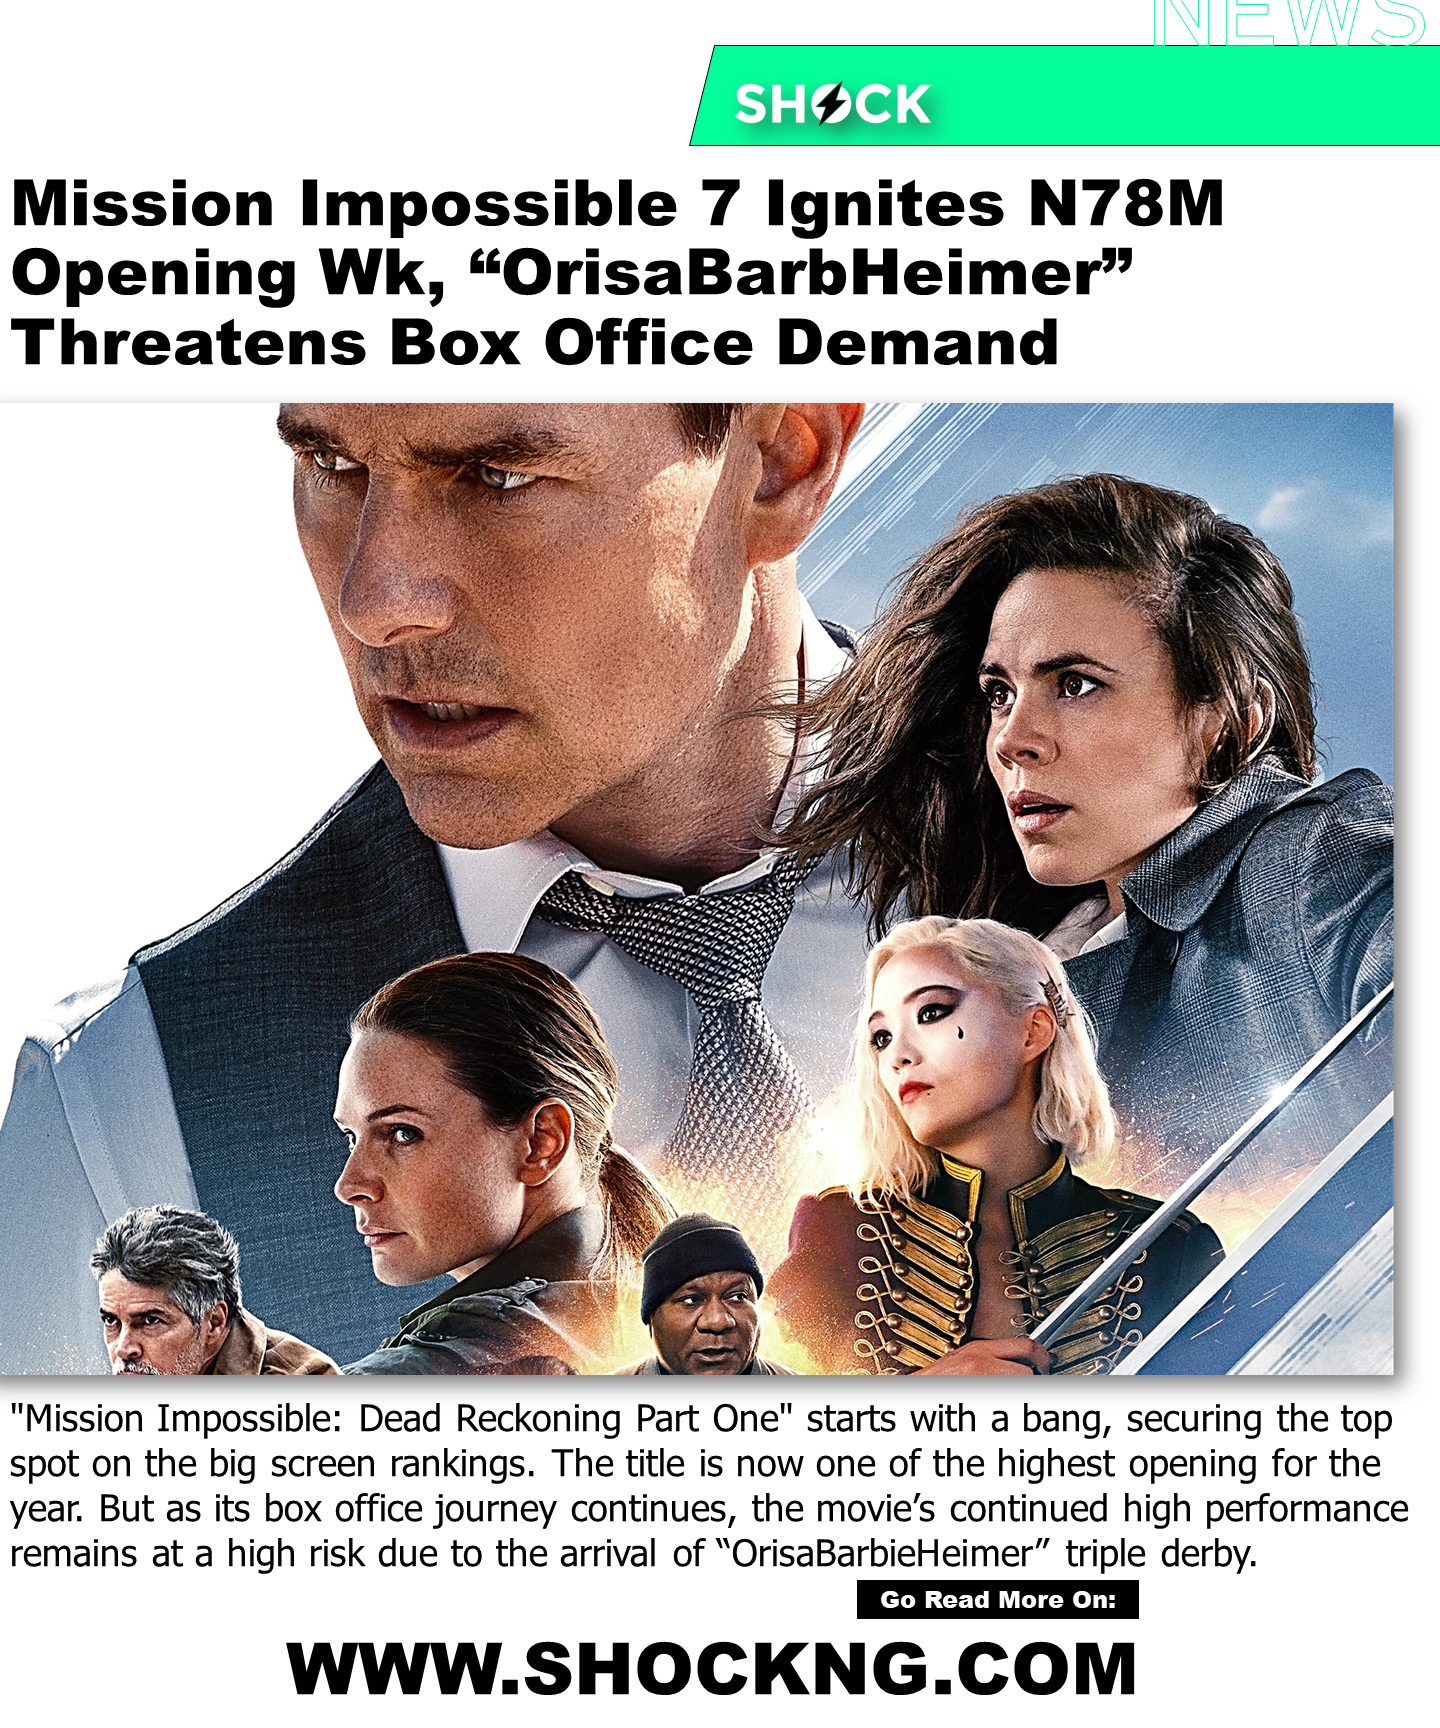 Mission Impossible 7 Ignites N78M Opening Wk OrisaBarbHeimer Threatens Box Office Demand - Mission Impossible: Dead Reckoning Ignites N78M Opening Week, #OrisaBarbieHeimer Threatens Box Office Demand